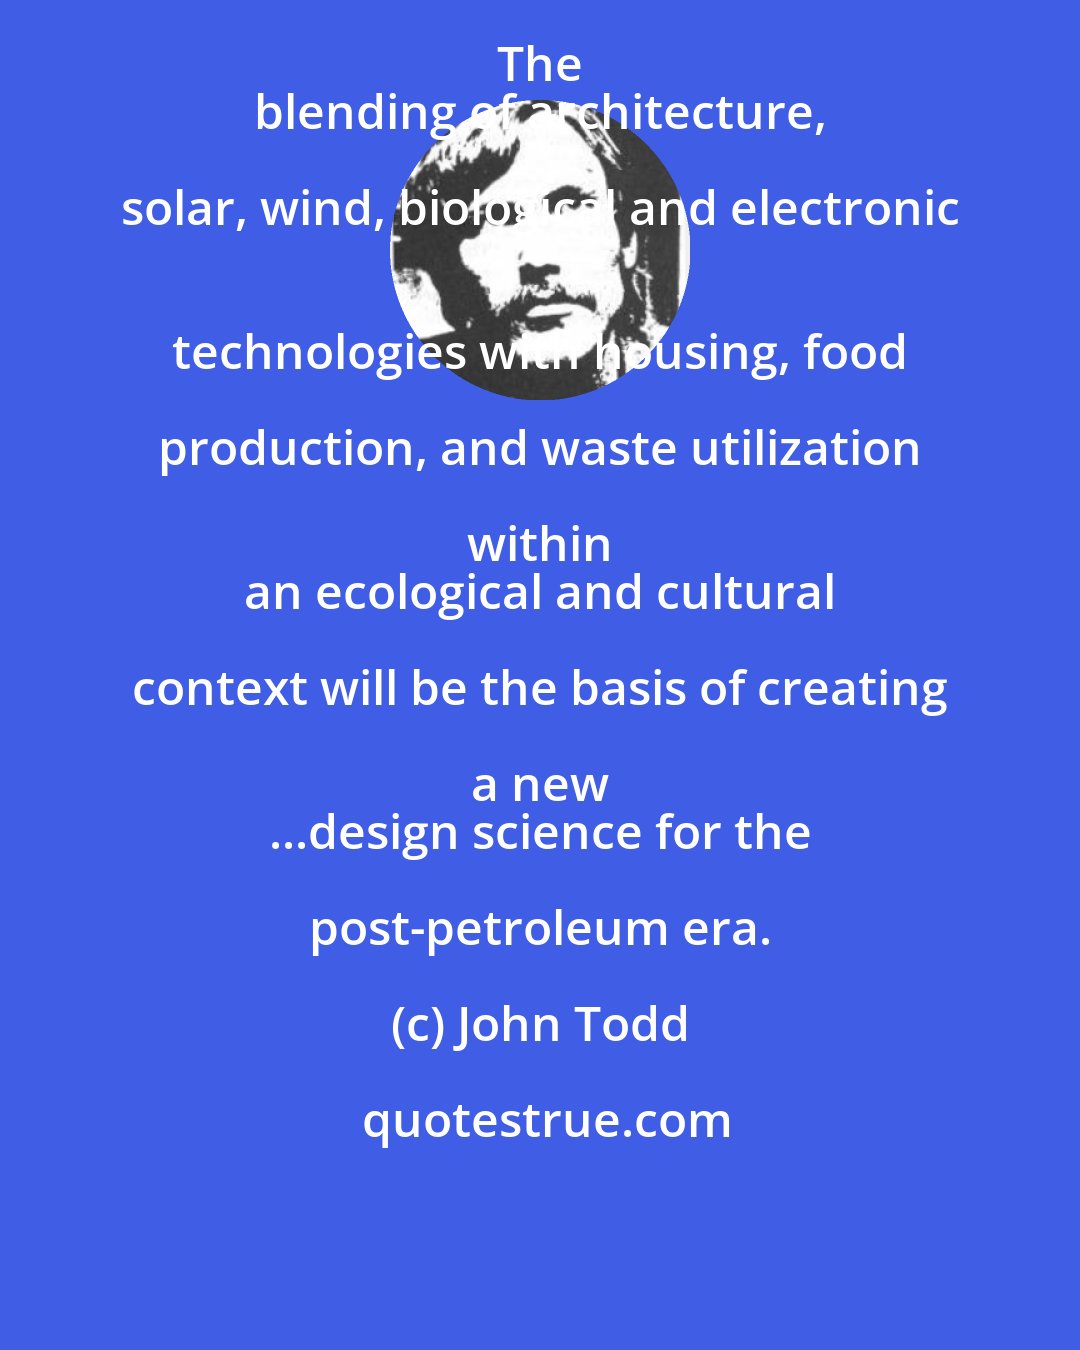 John Todd: The 
 blending of architecture, solar, wind, biological and electronic 
 technologies with housing, food production, and waste utilization within 
 an ecological and cultural context will be the basis of creating a new 
 ...design science for the post-petroleum era.